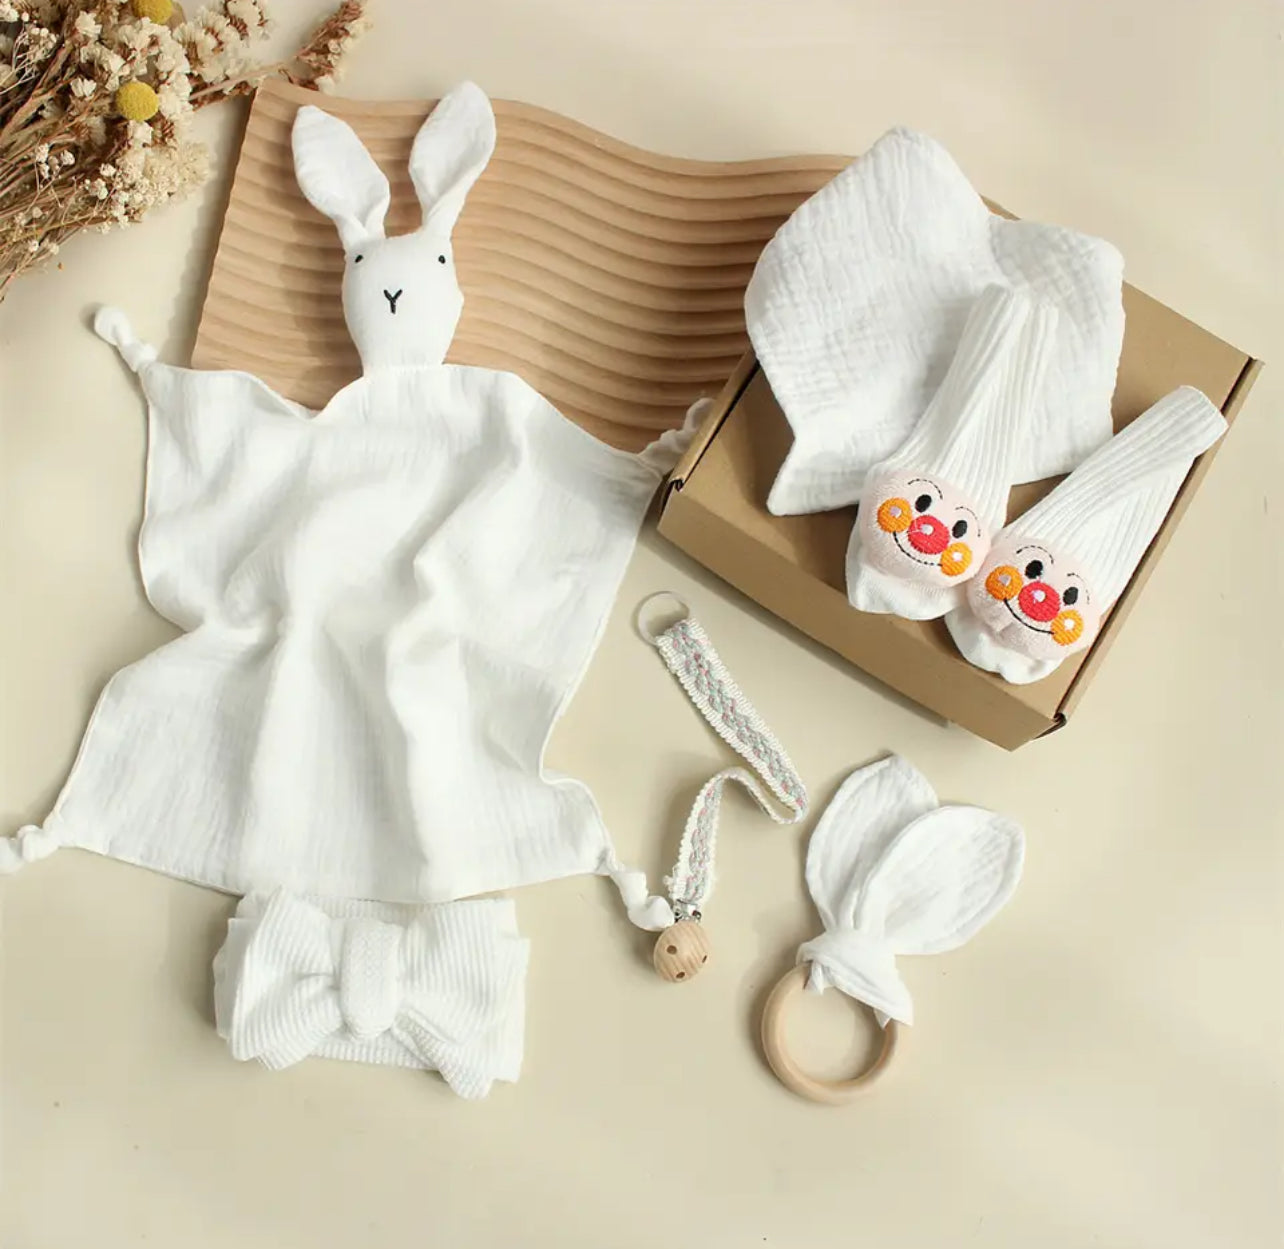 “6Pcs Gifts Box Set” Wooden Rattle Brushs Bunny Towel For Baby Shower Gift and more